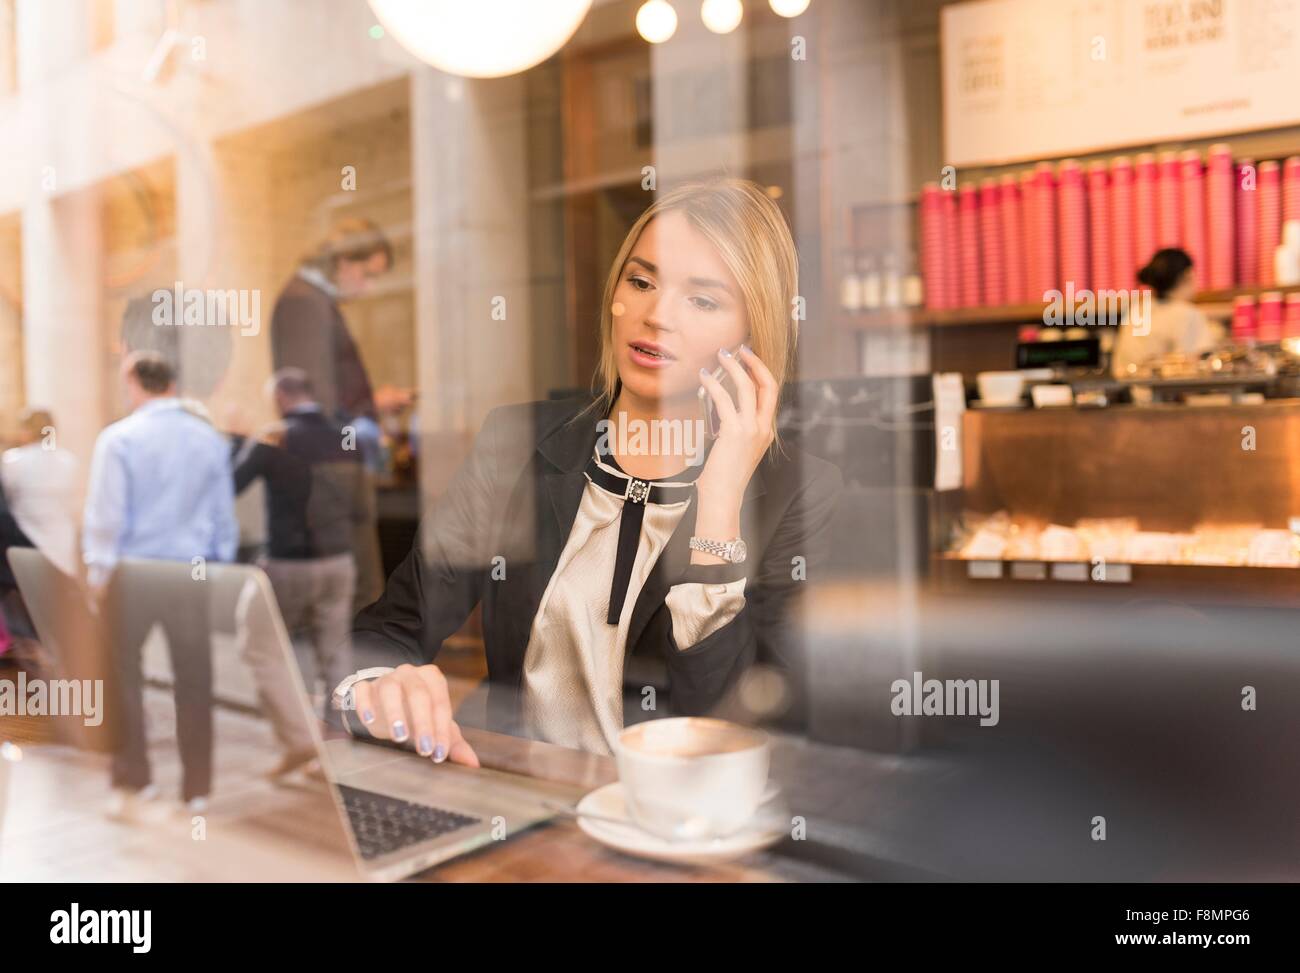 Businesswoman working on laptop in cafe Banque D'Images